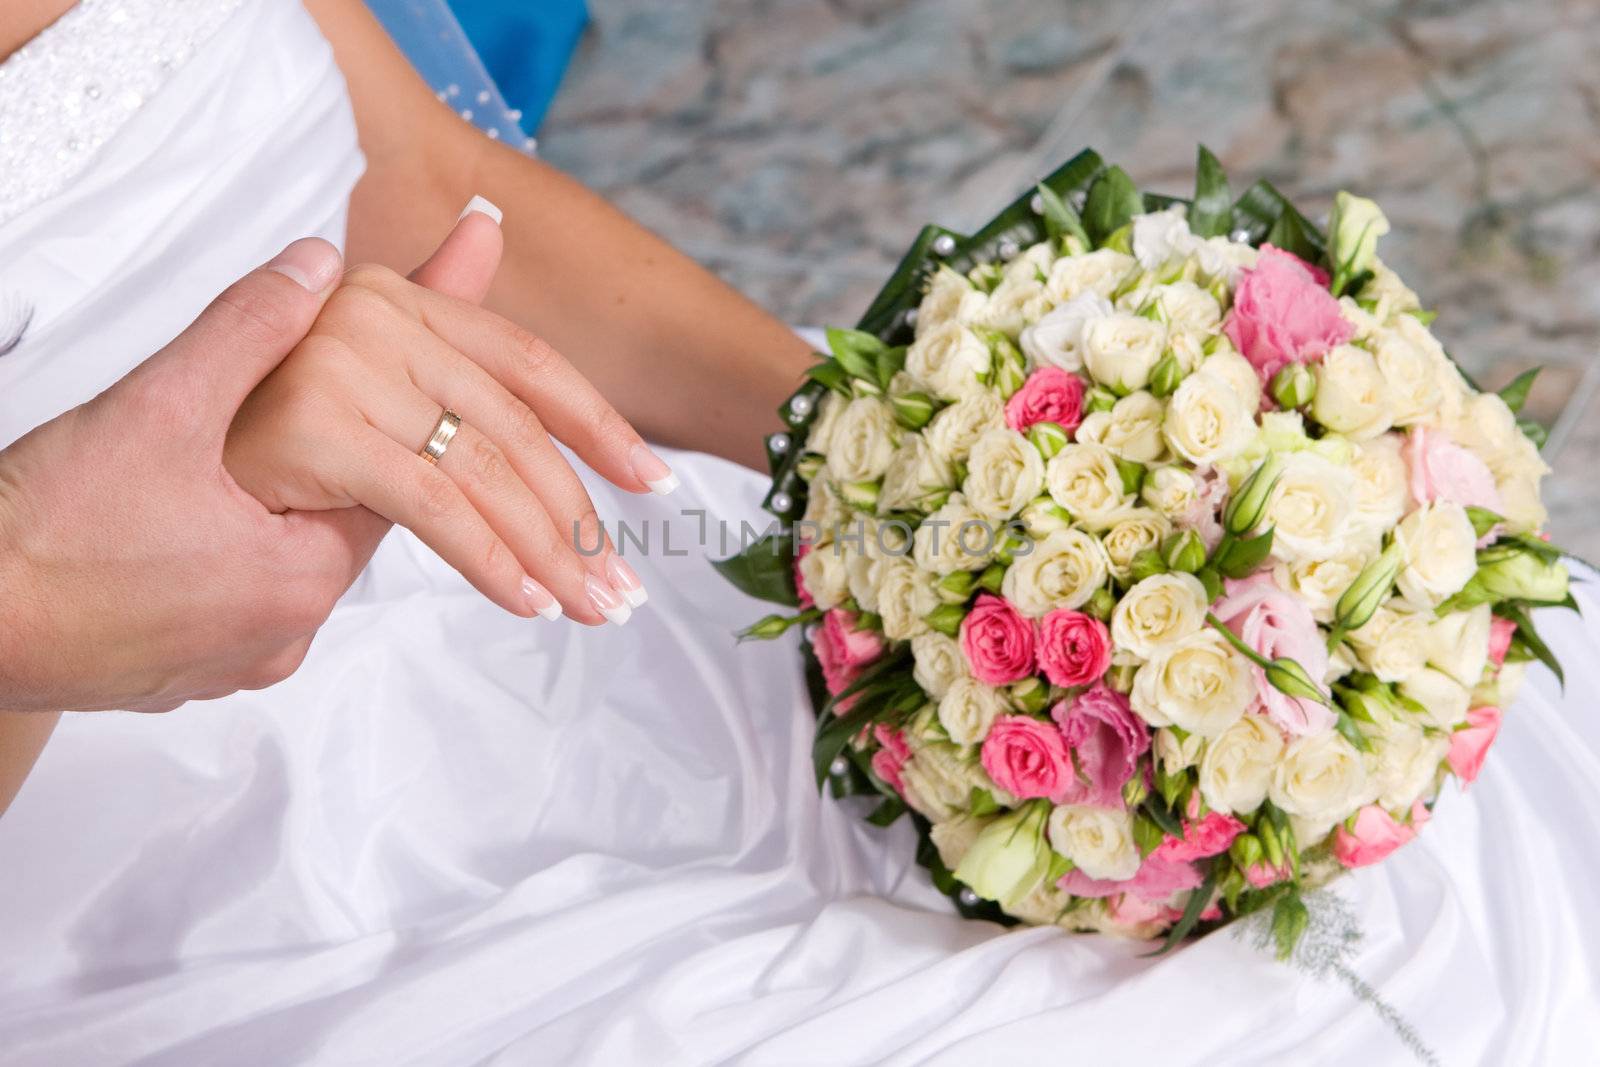 hands with gold rings and flower bouquet#1 by vsurkov